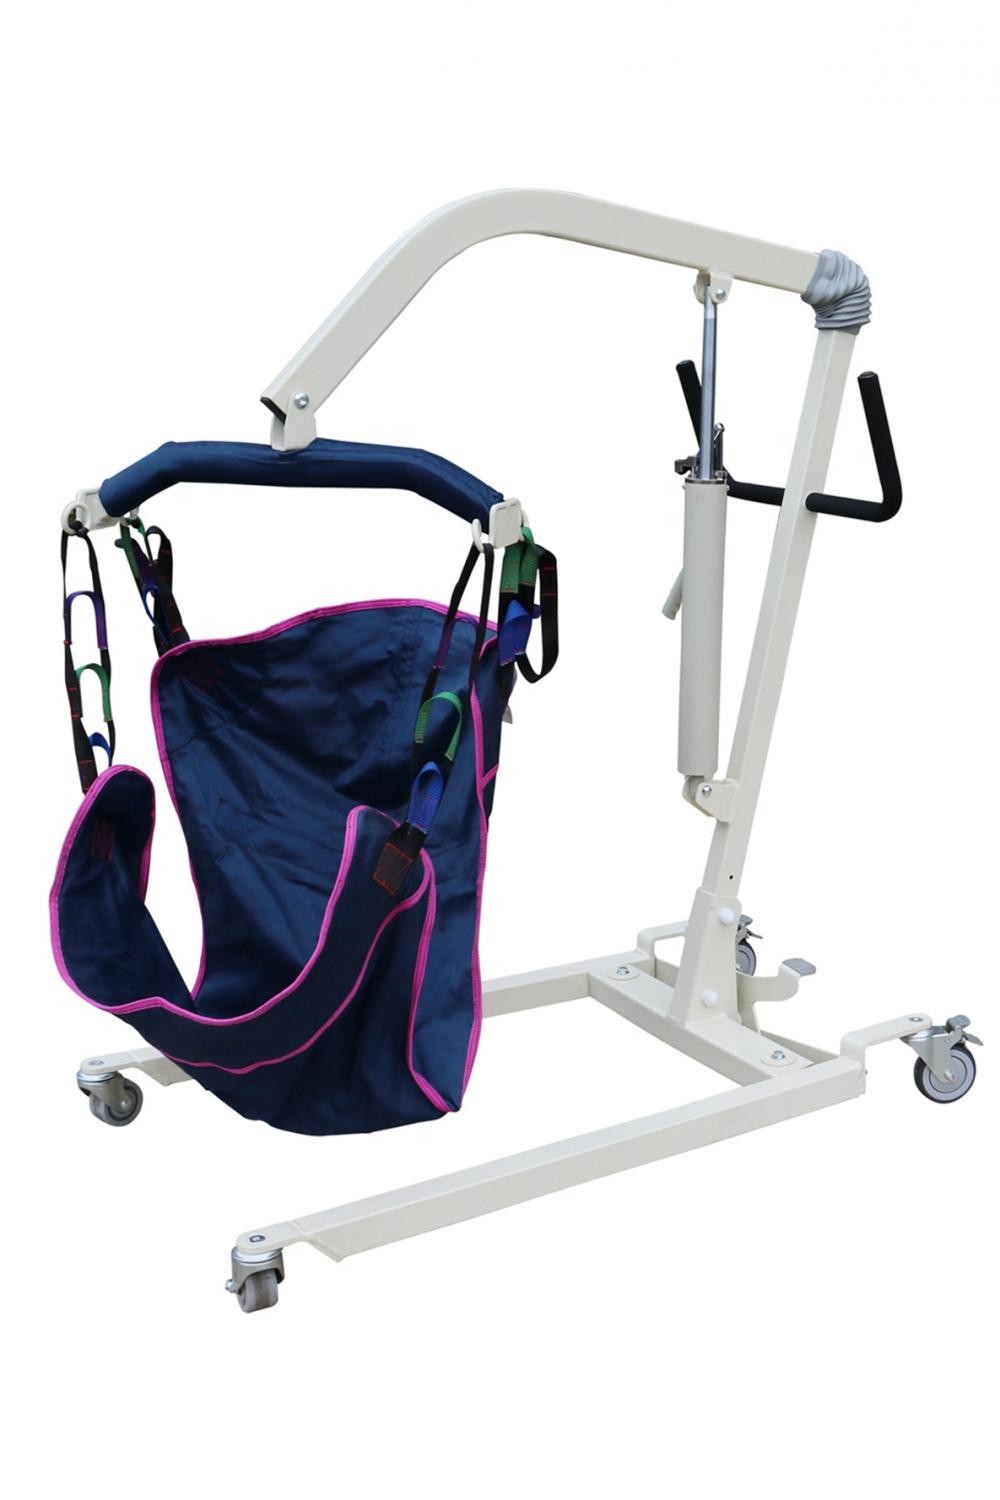 Patient lifting devices for home use